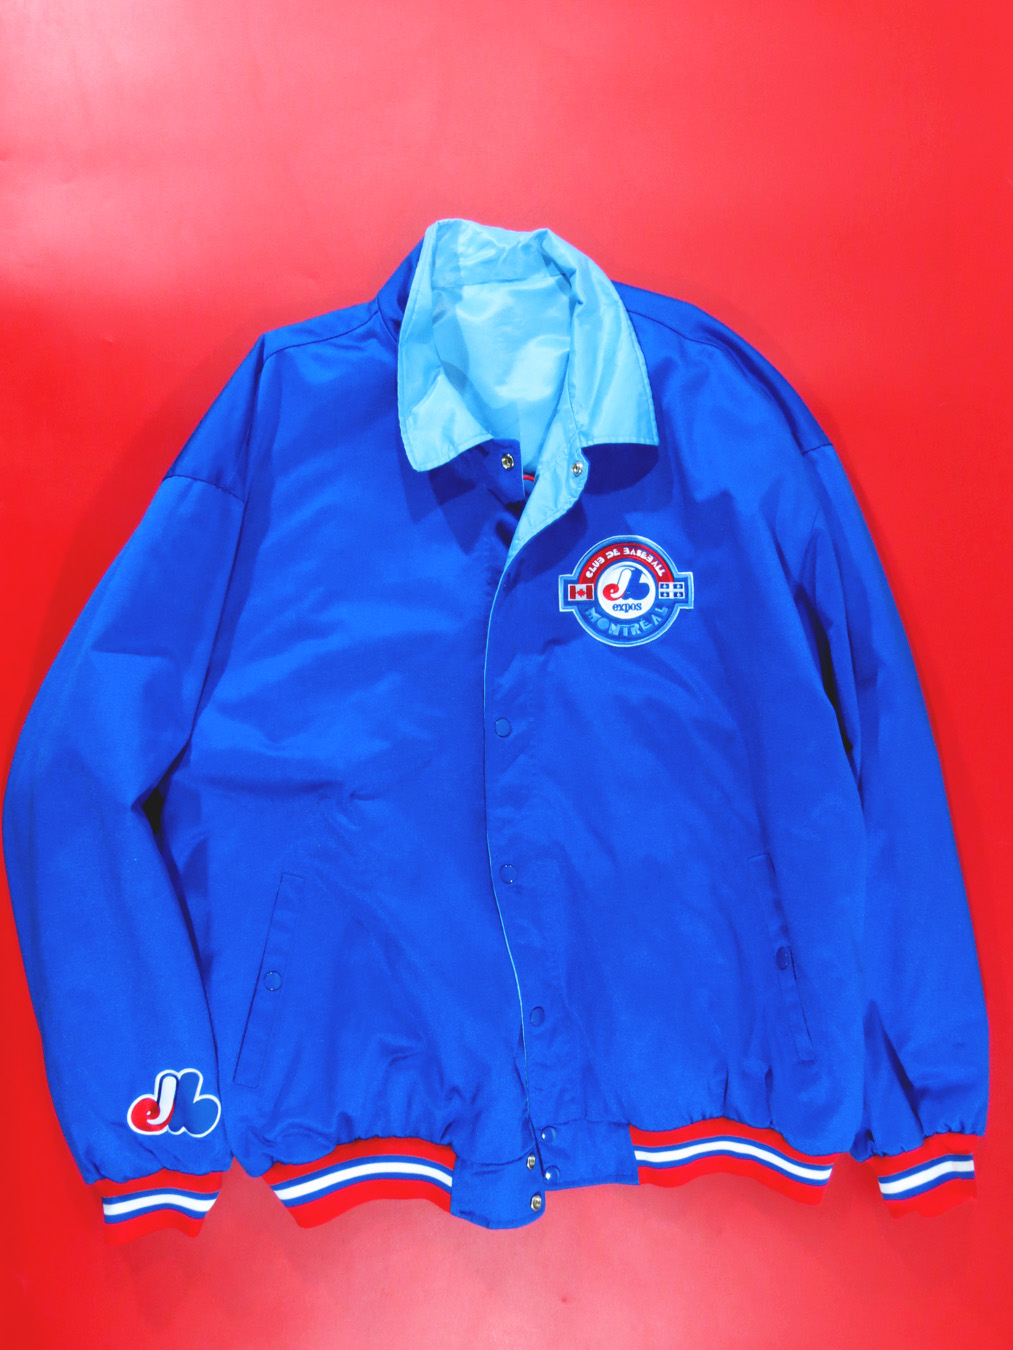 Montreal Expos XL Jacket for Sale in Everett, WA - OfferUp